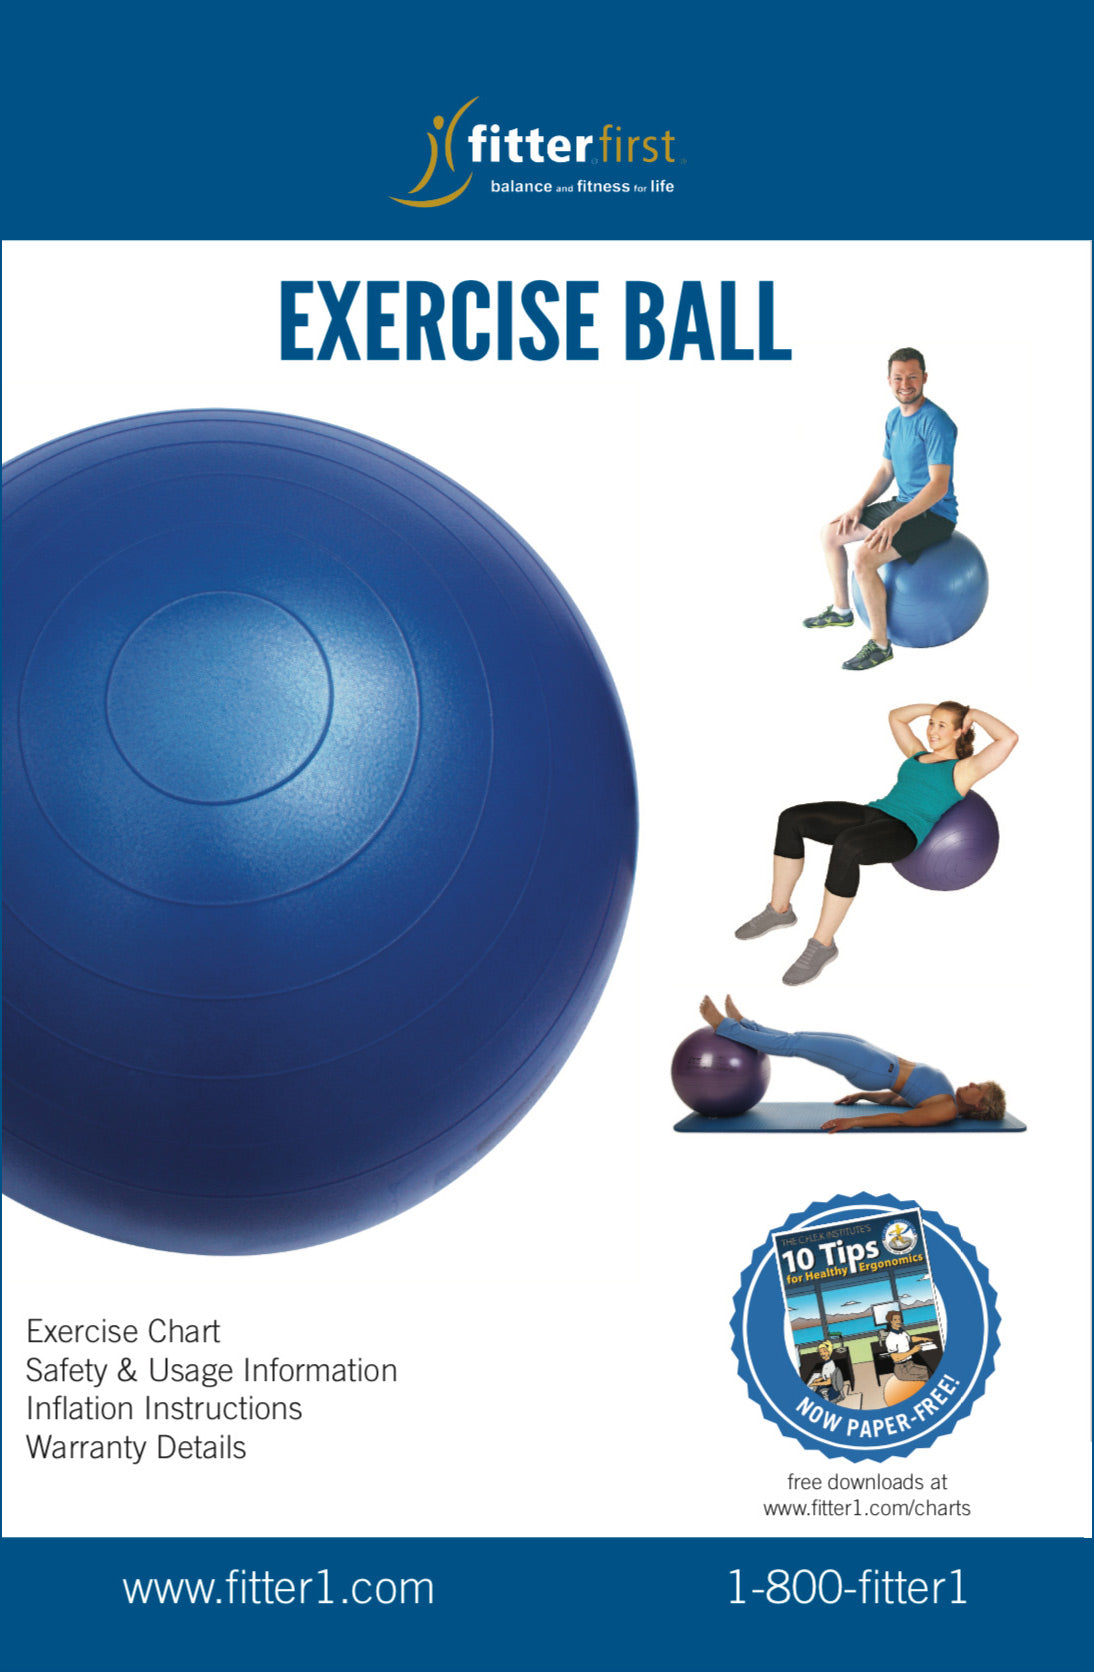 Exercise Charts for Stability Ball (Balance Ball, Swiss Ball) and